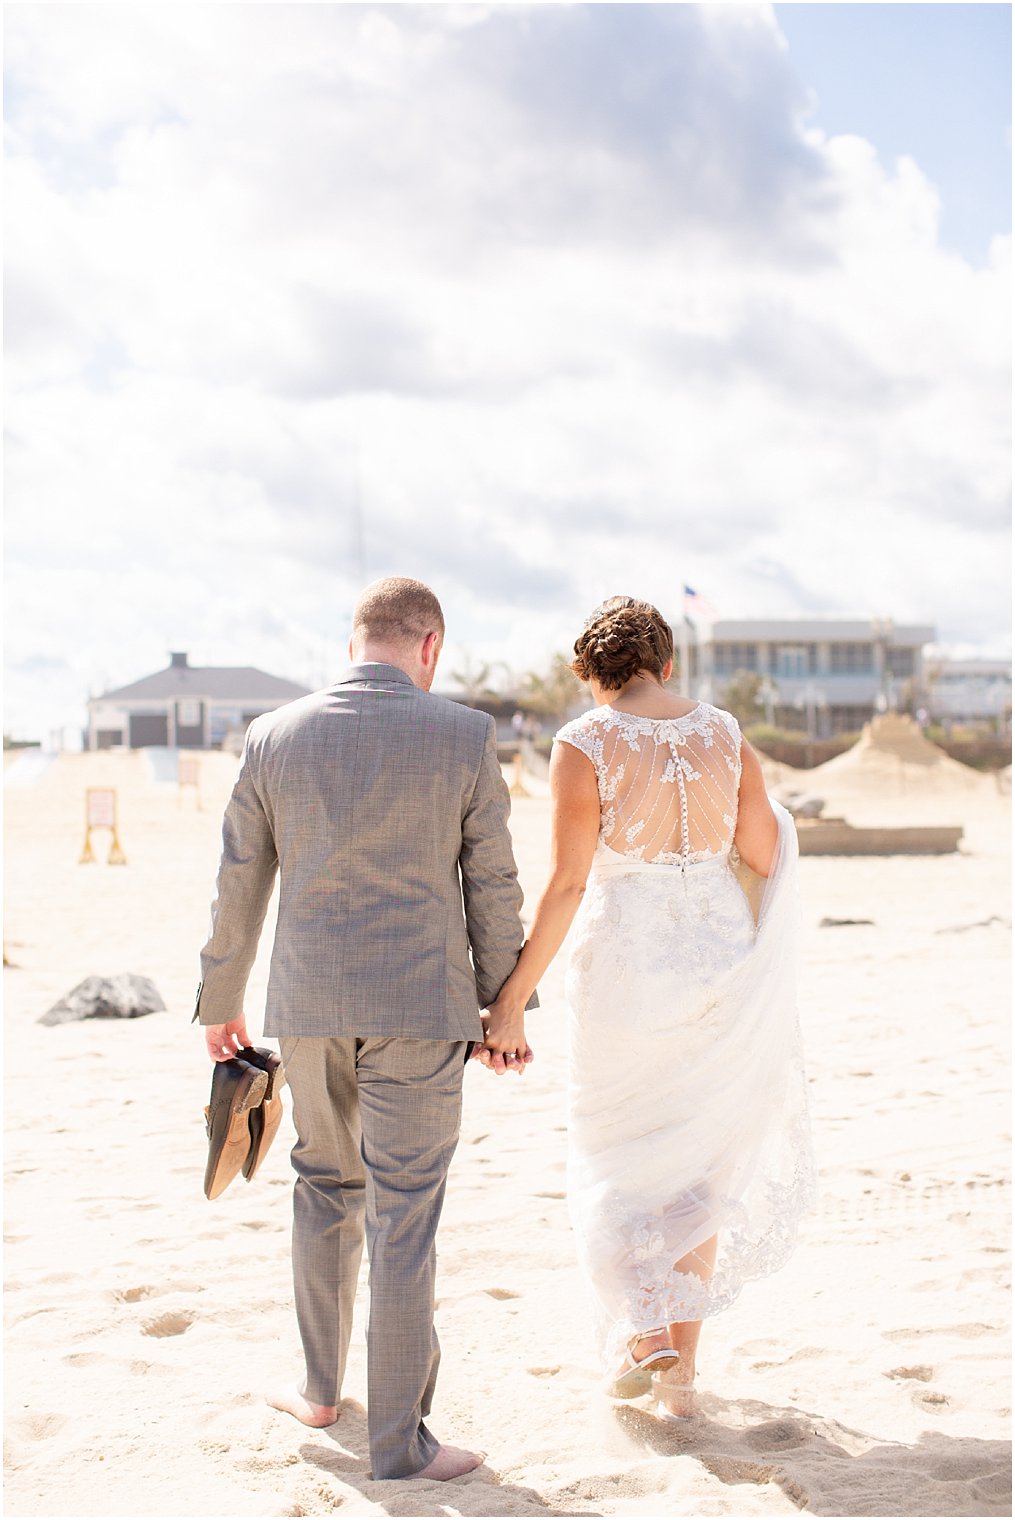 Ocean Place Resort and Spa wedding portraits on beach with Idalia Photography